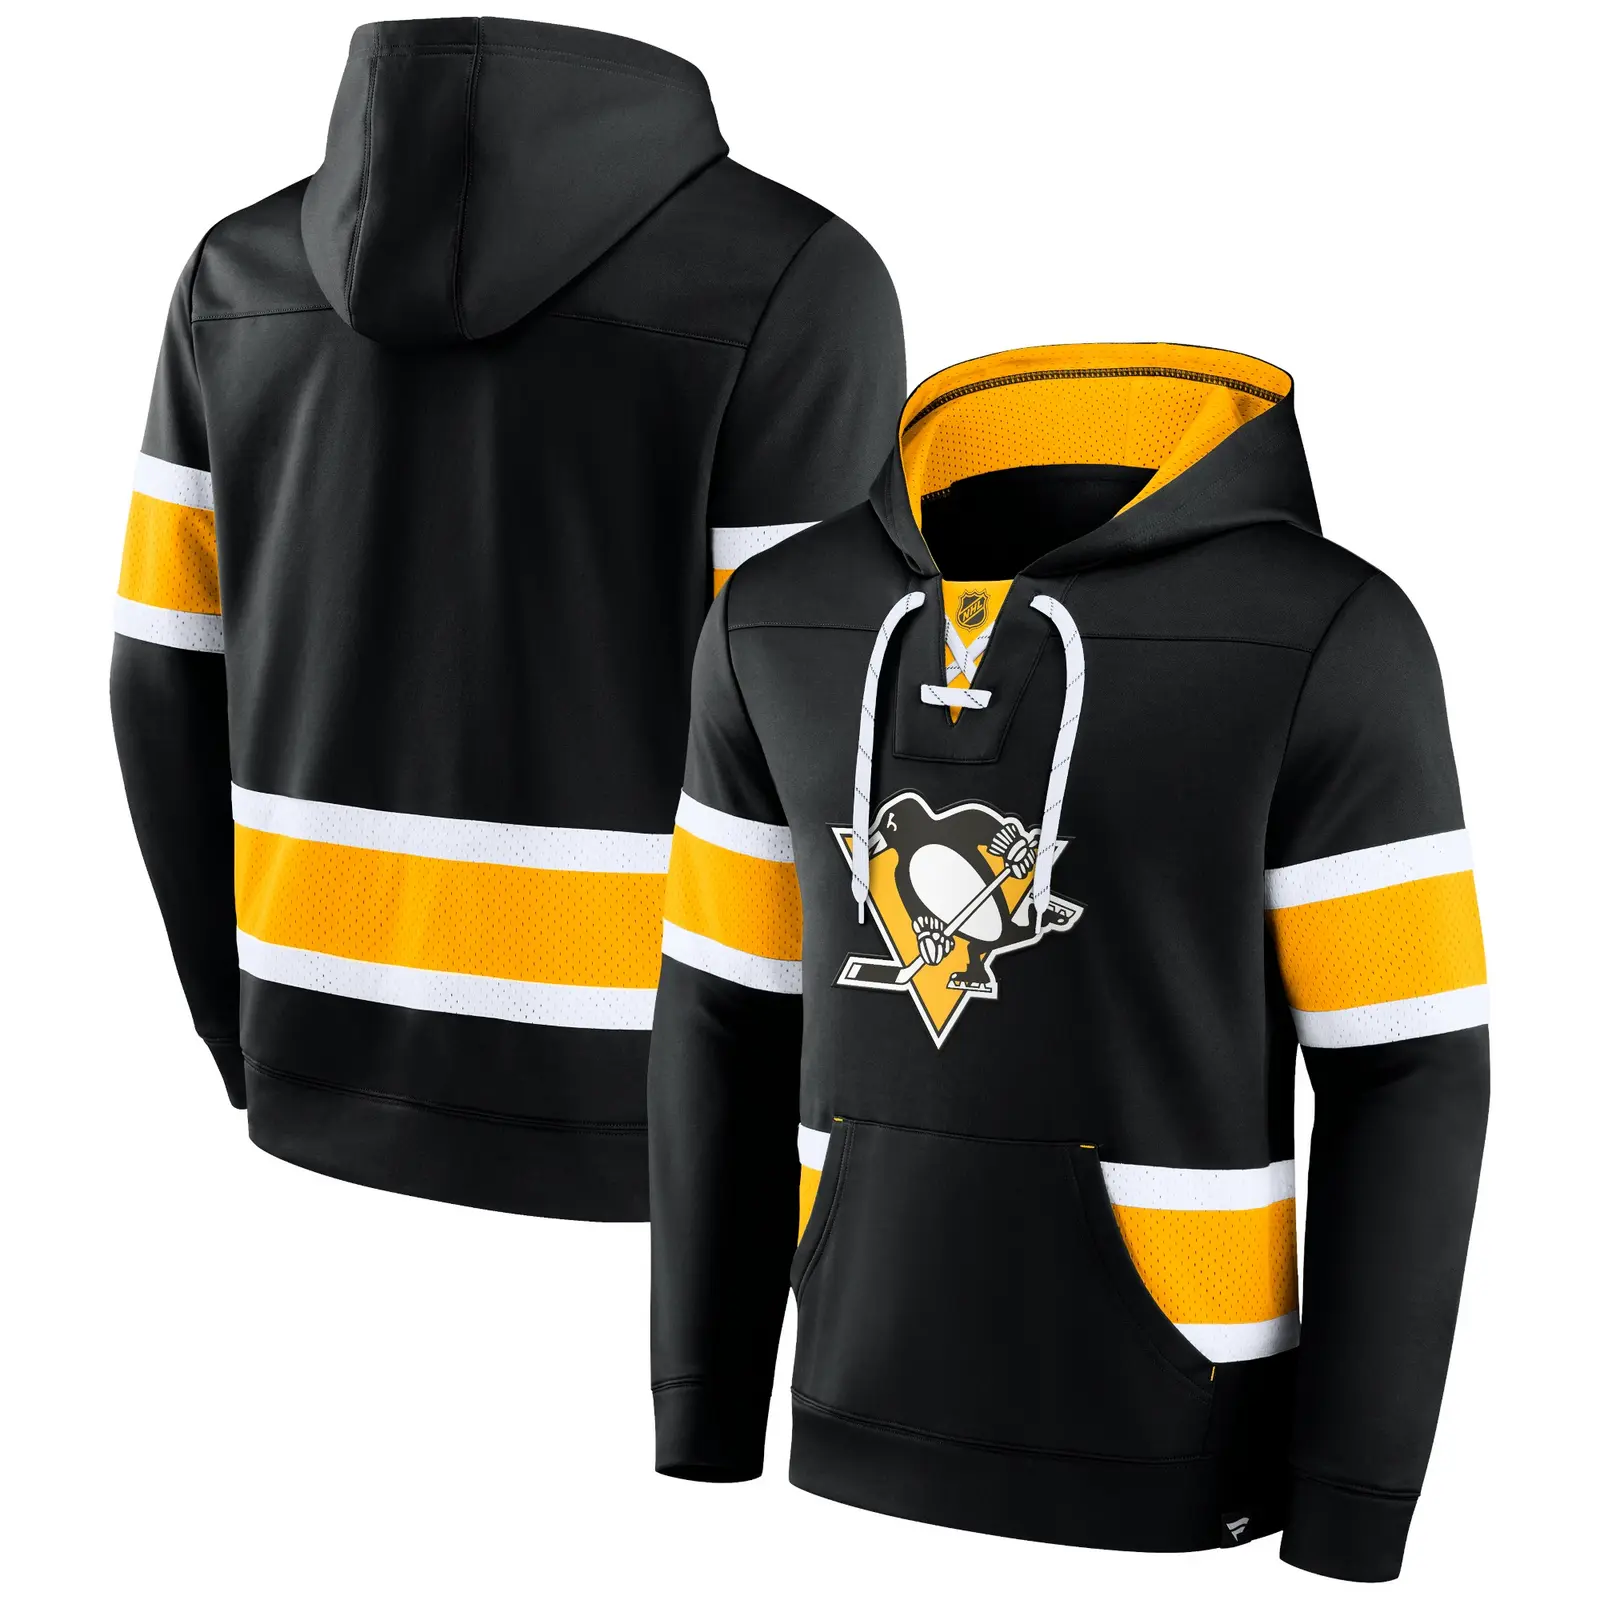 Pánská mikina Fanatics  Mens Iconic NHL Exclusive Pullover Hoodie Pittsburgh Penguins